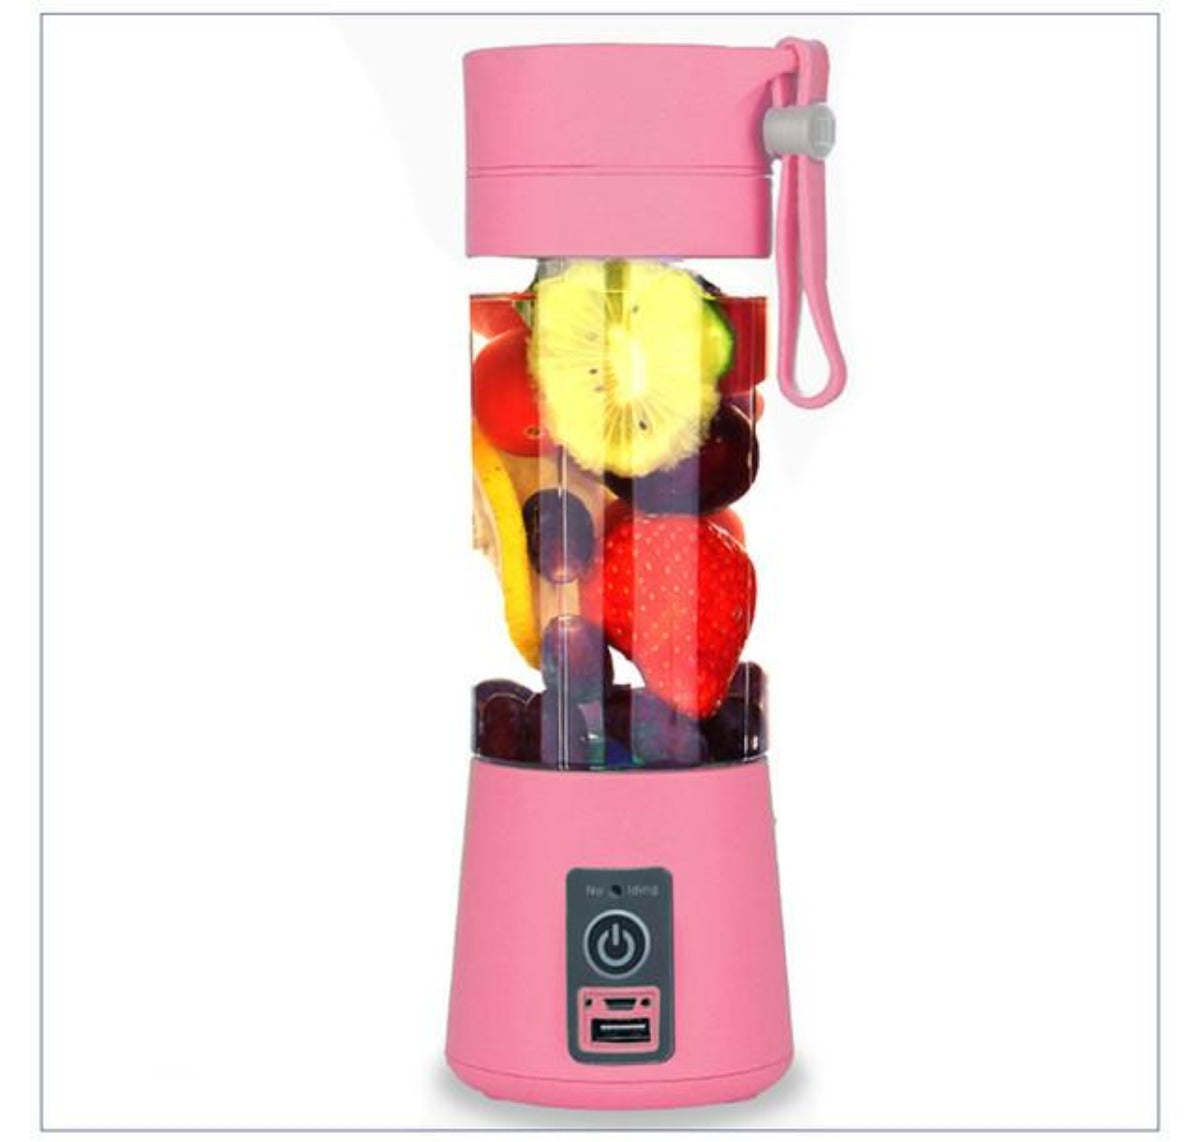 A Portable USB Electric Fruit Juice Blender Deluxe Version with 6 Blades with fruit in it.